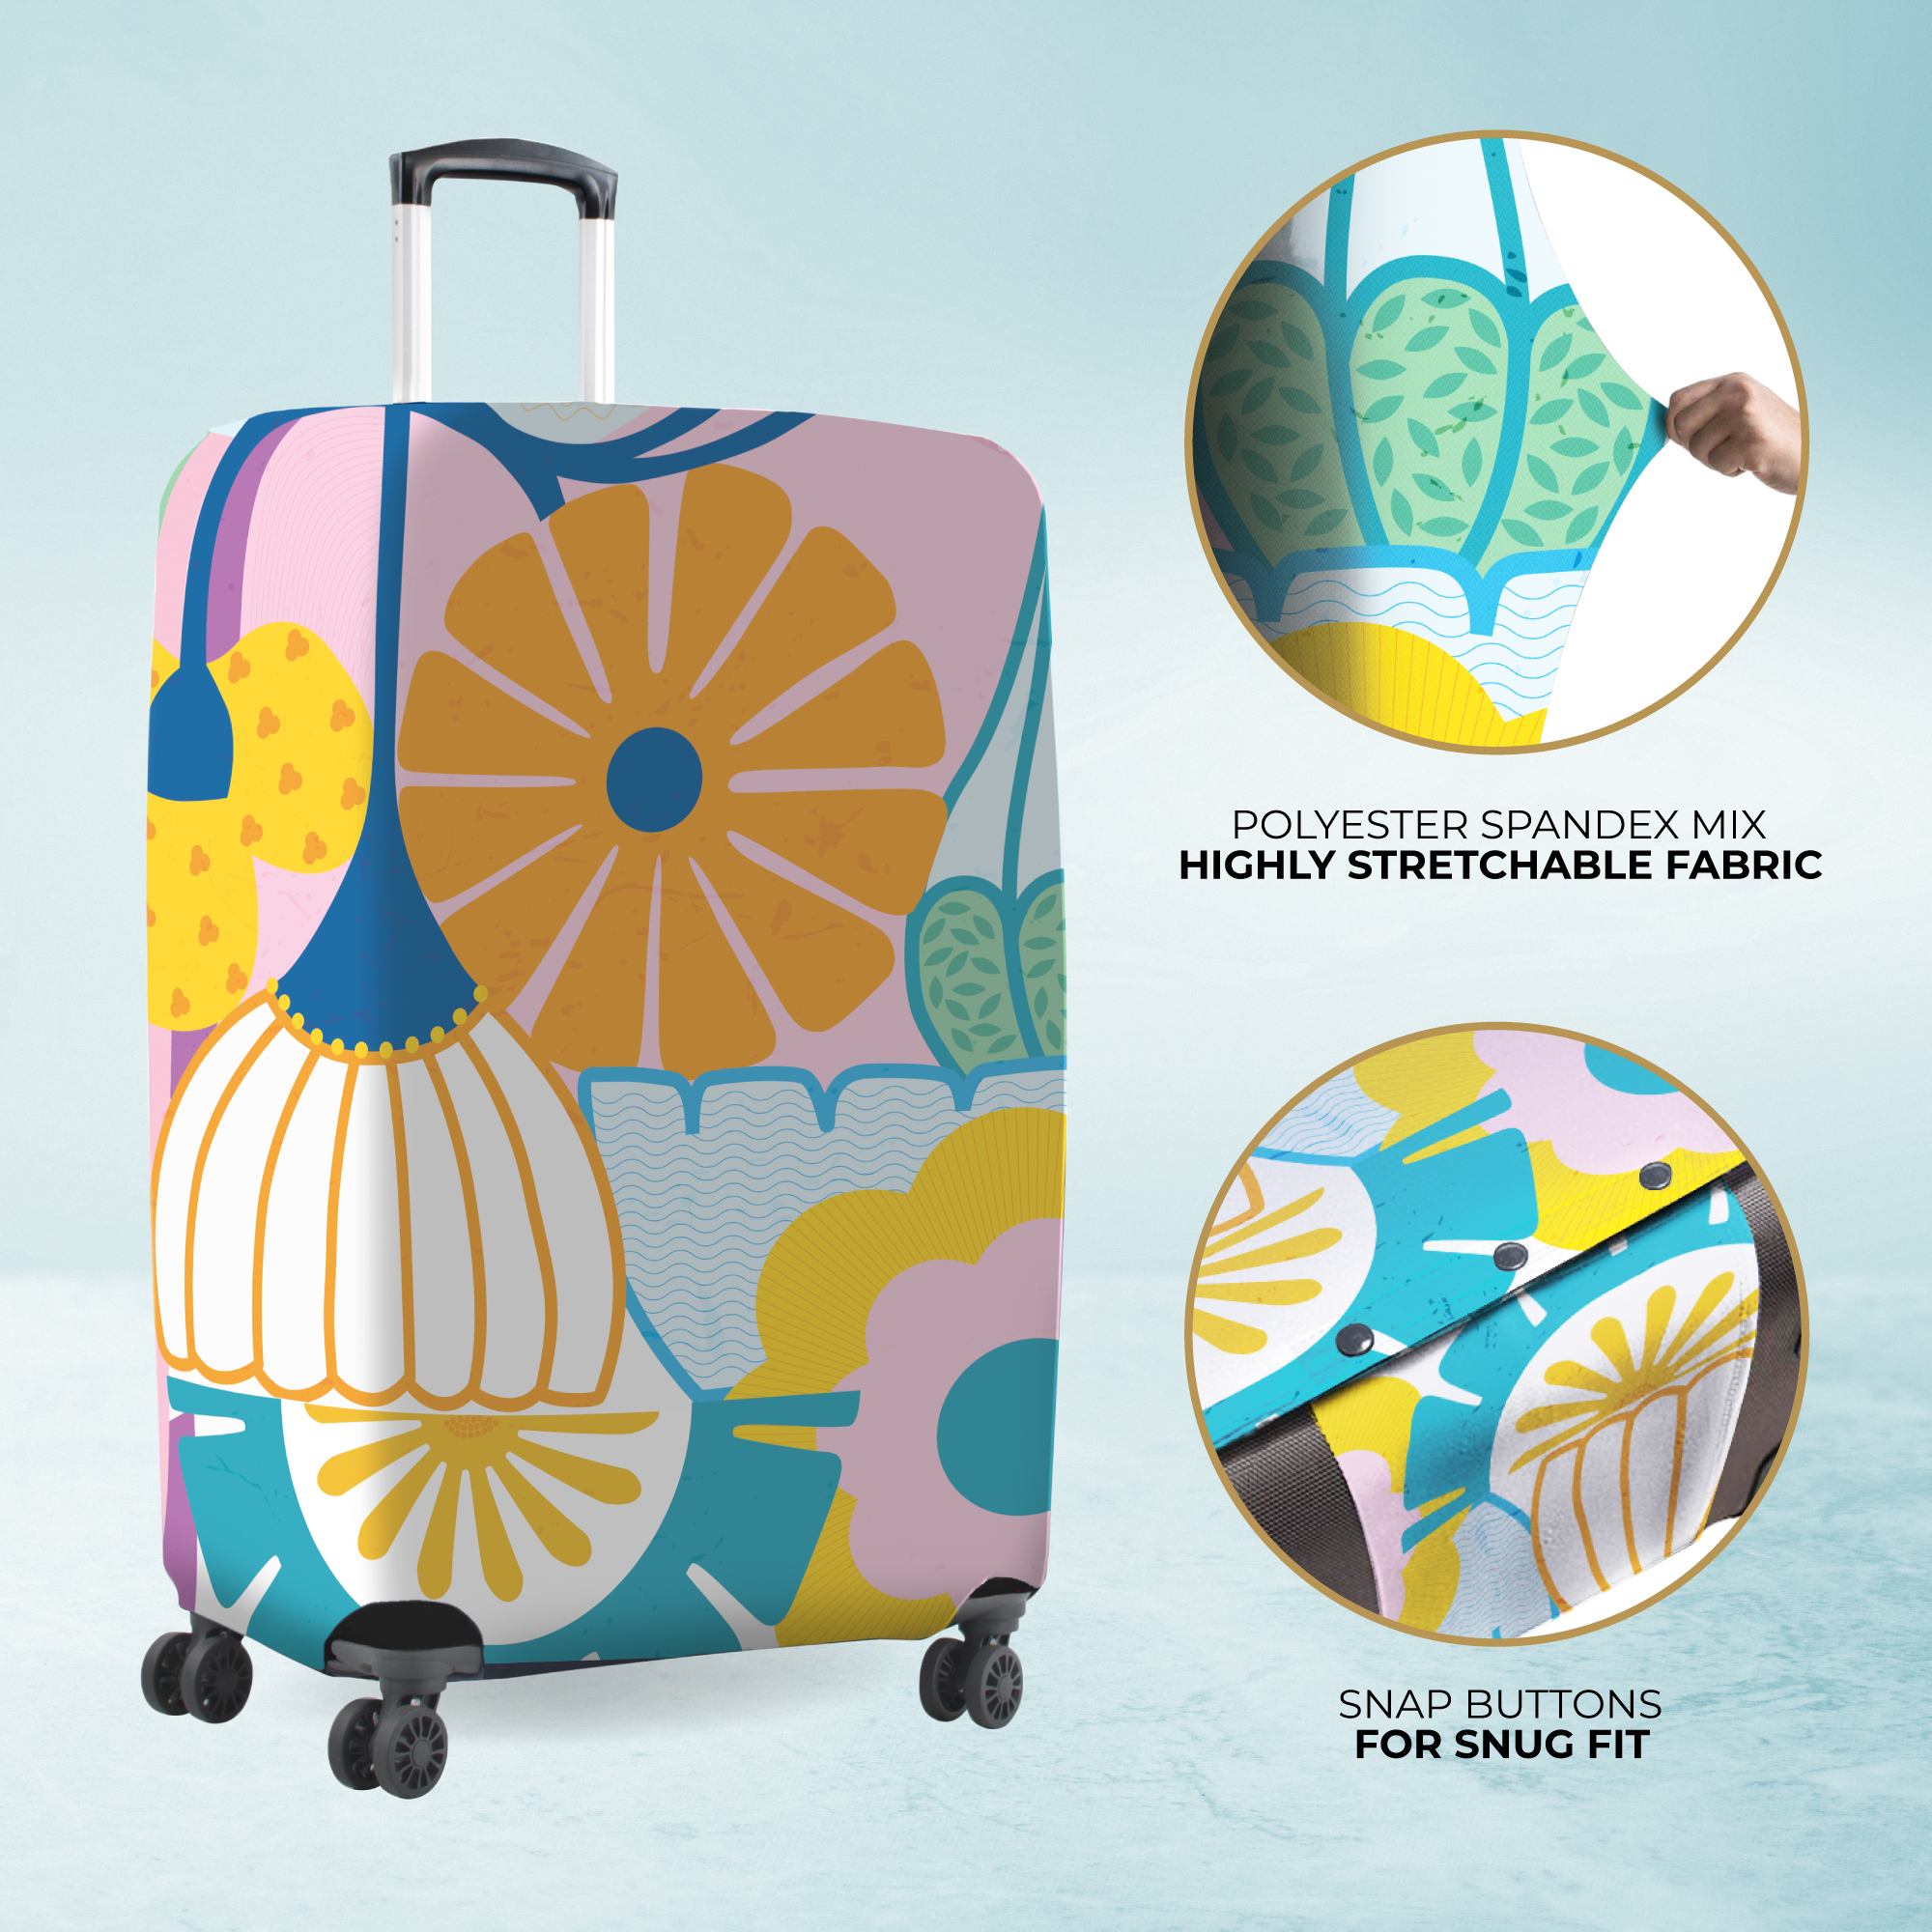 Luggage Cover Pink Beach Design